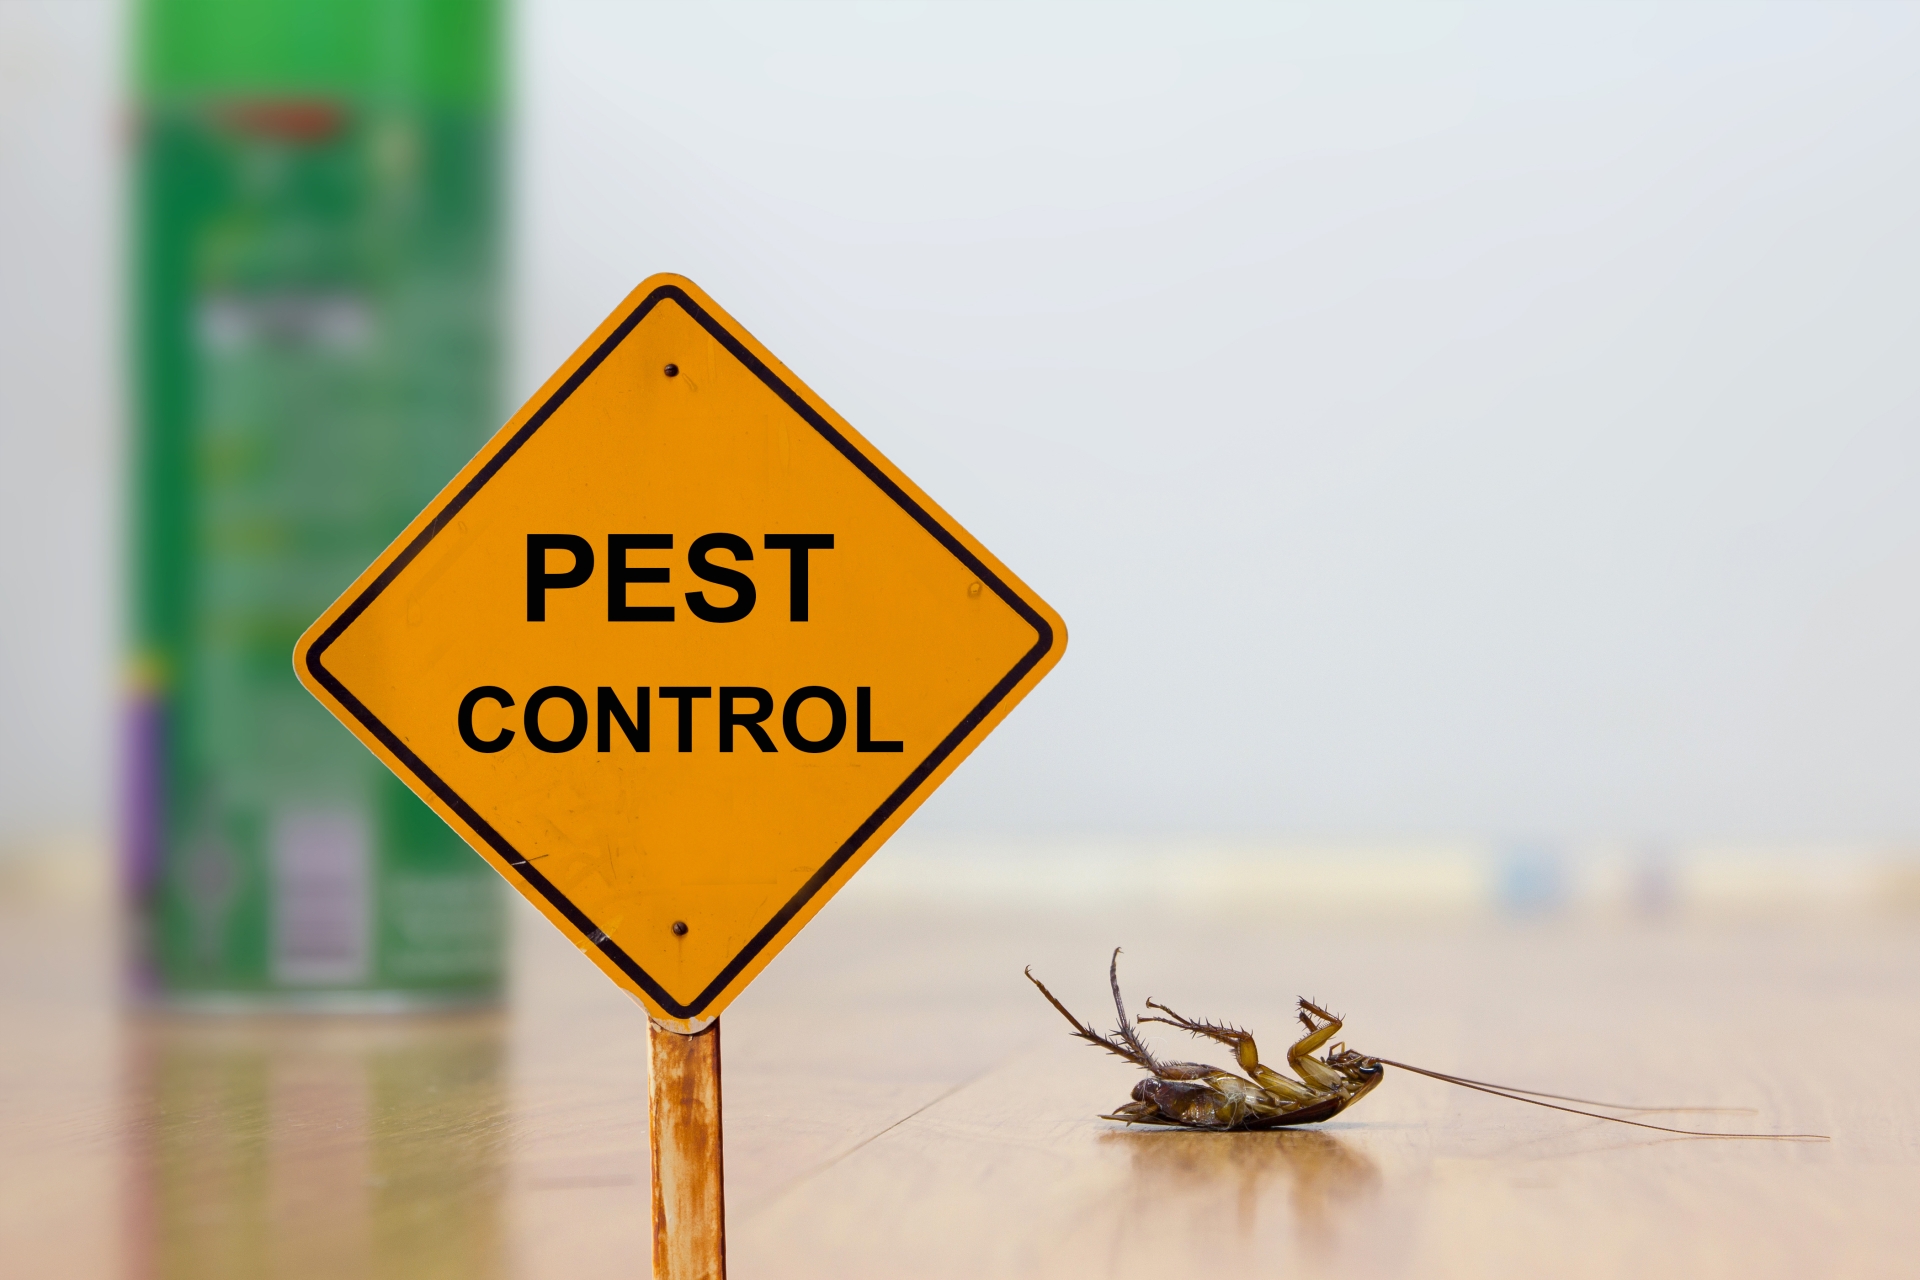 24 Hour Pest Control, Pest Control in Mill Hill, NW7. Call Now 020 8166 9746